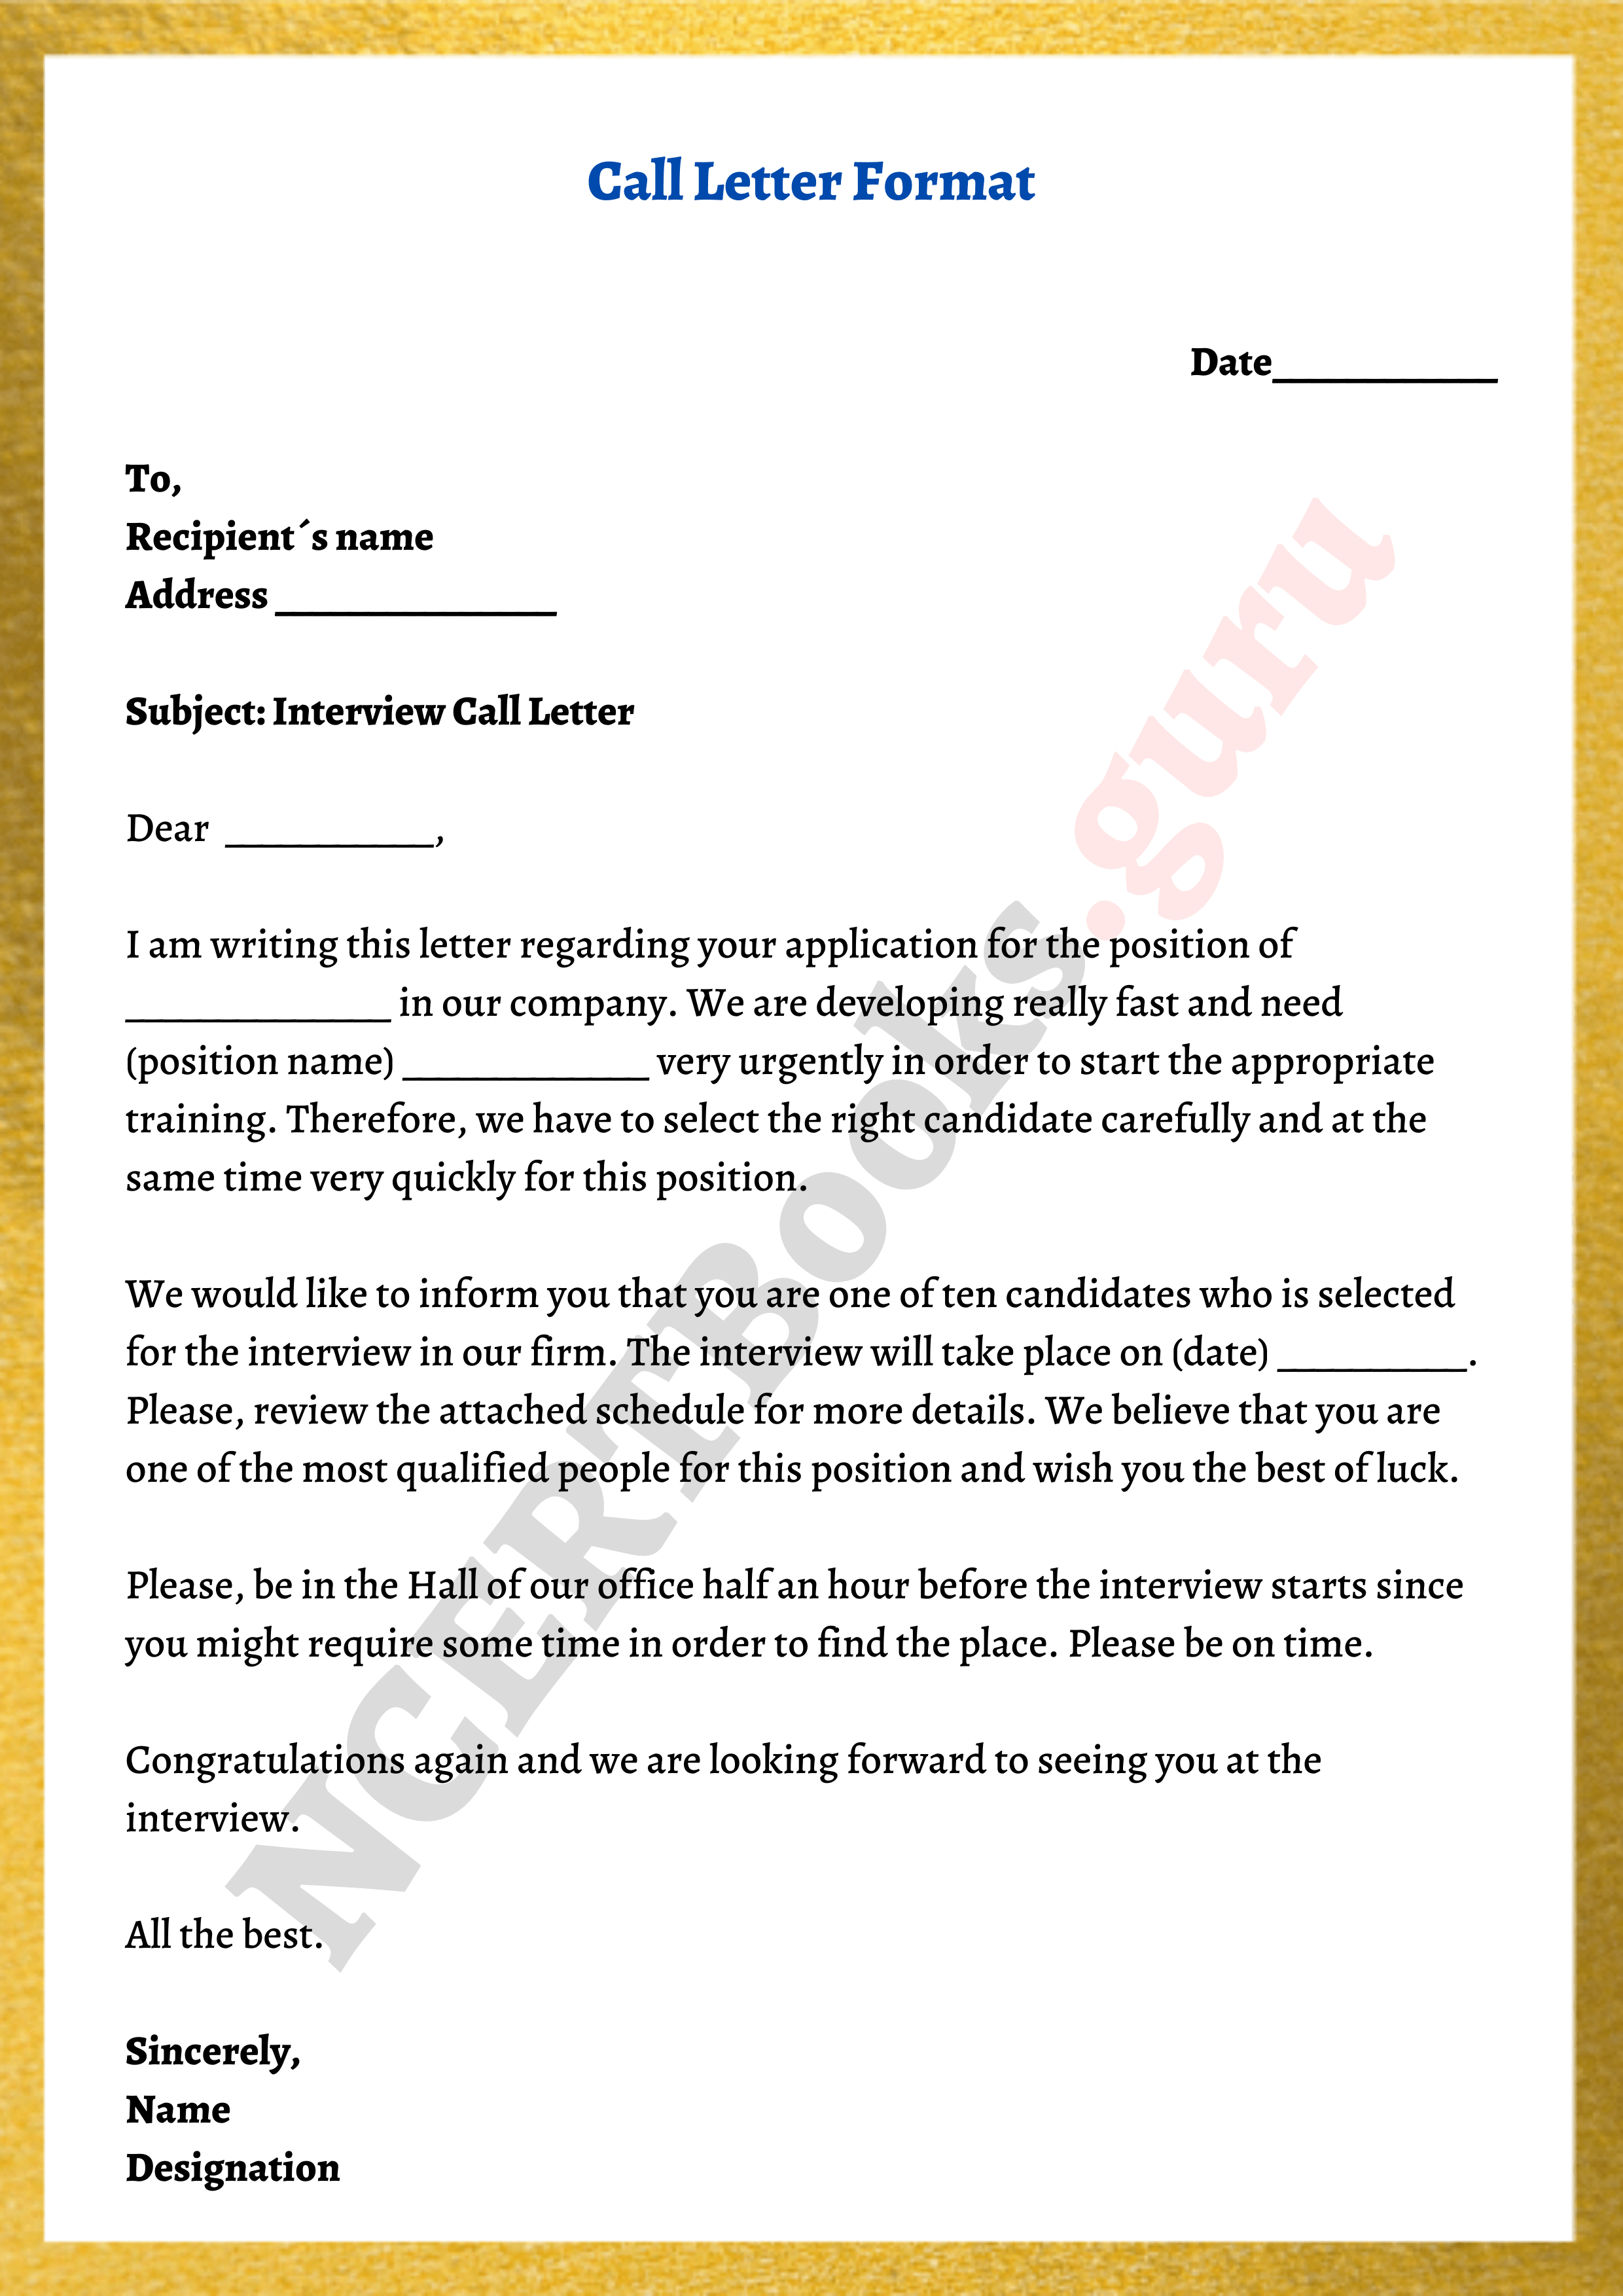 call letter format